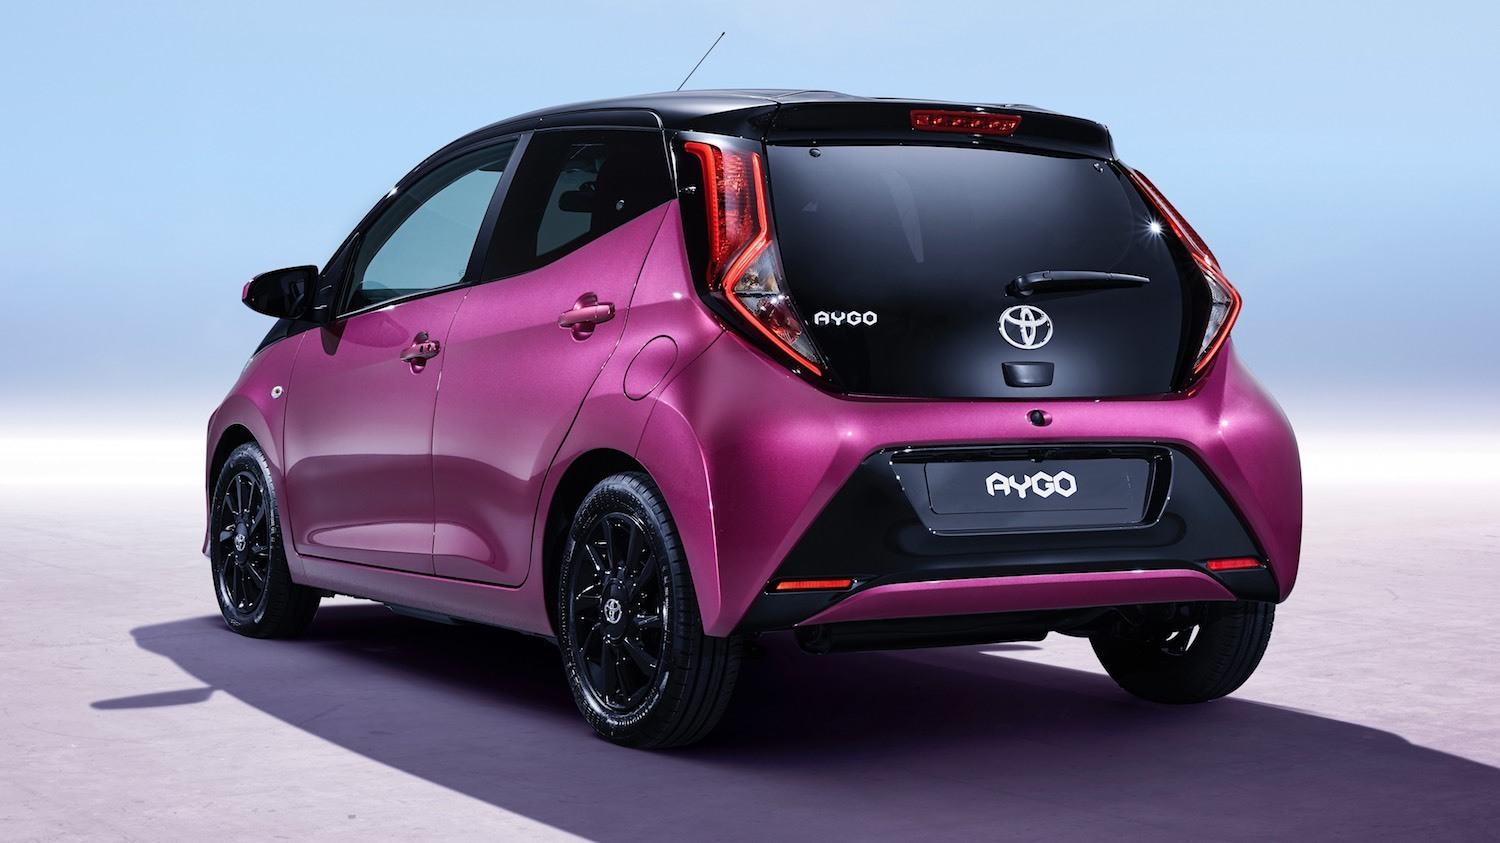 https://www.drive.co.uk/wp-content/uploads/2018/06/Tim-Barnes-Clay-Carwrite-ups-reviews-the-New-Toyota-Aygo-2018-5.jpg